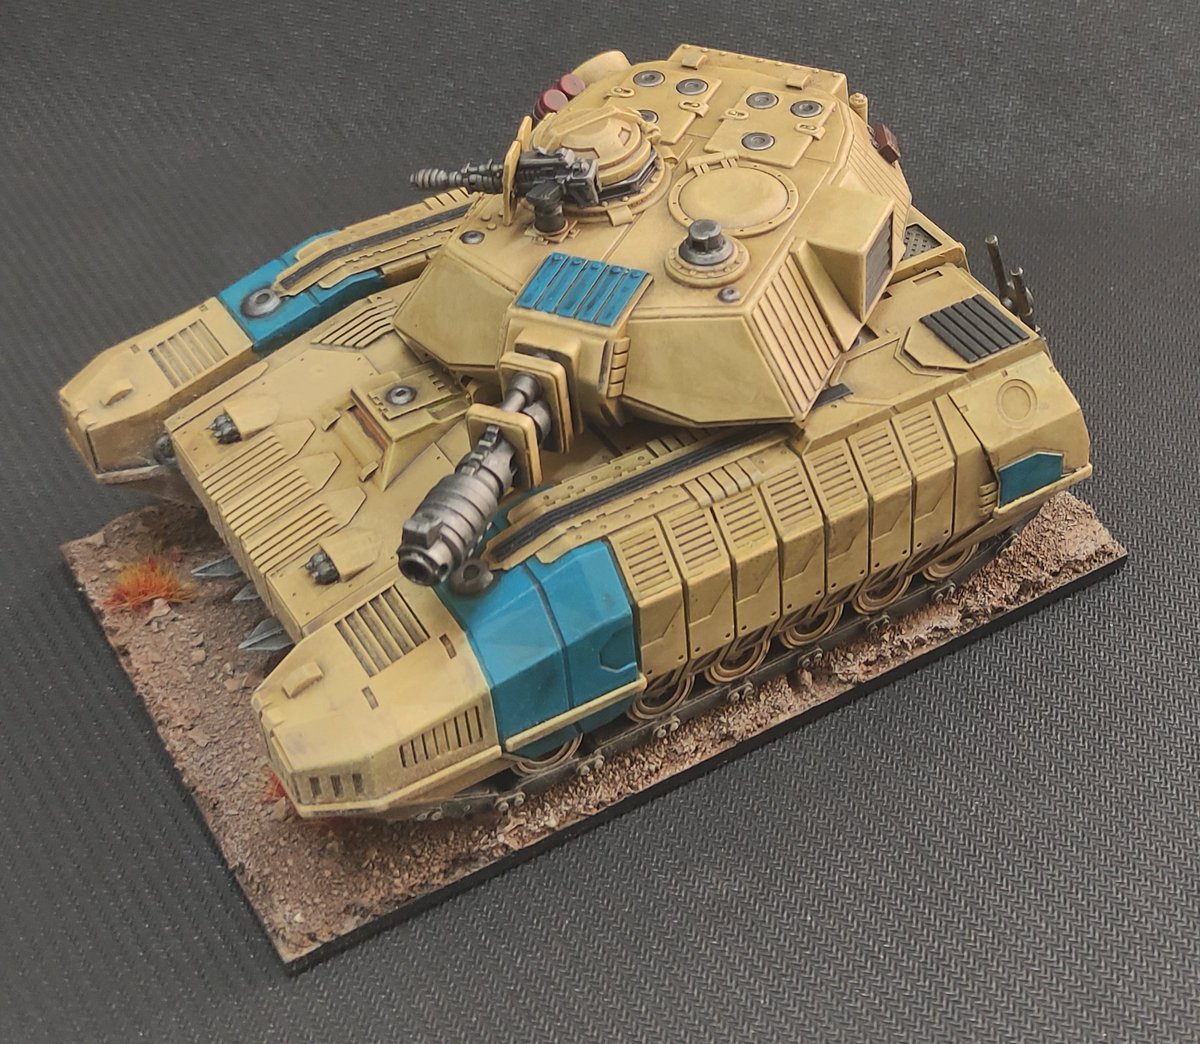 A new tank for muy GCPS army! The model is an STL by @Corvusgamester1 , which I like more than the official model, I feel like this one is closer to the GCPS aesthetic.